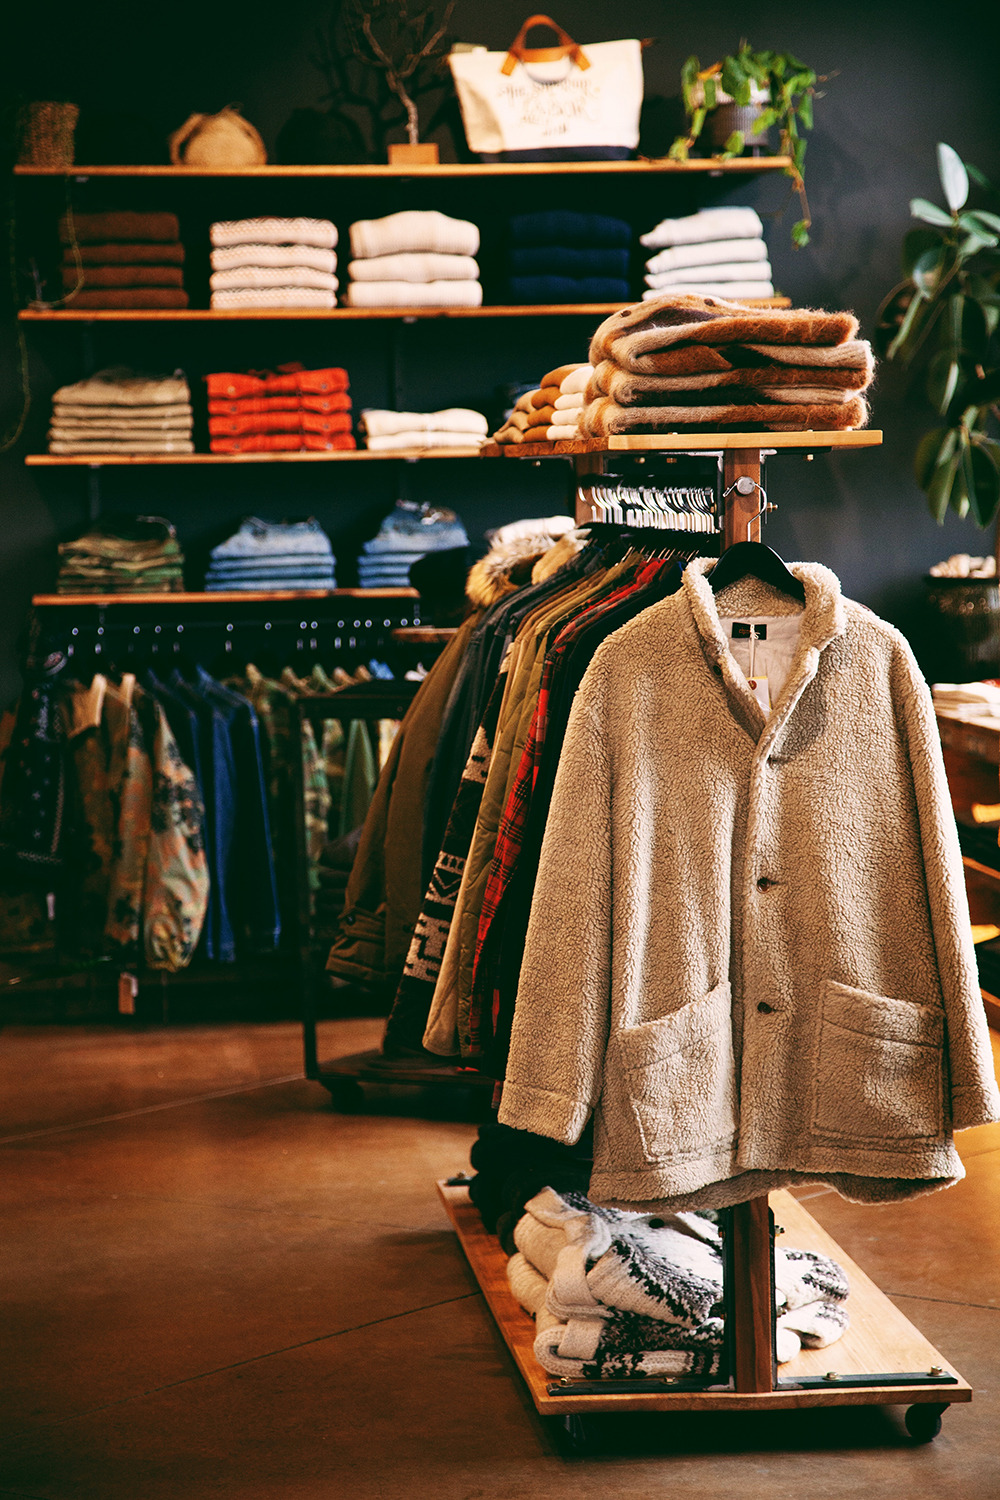 Die, Workwear! - How Workwear Stores are Evolving